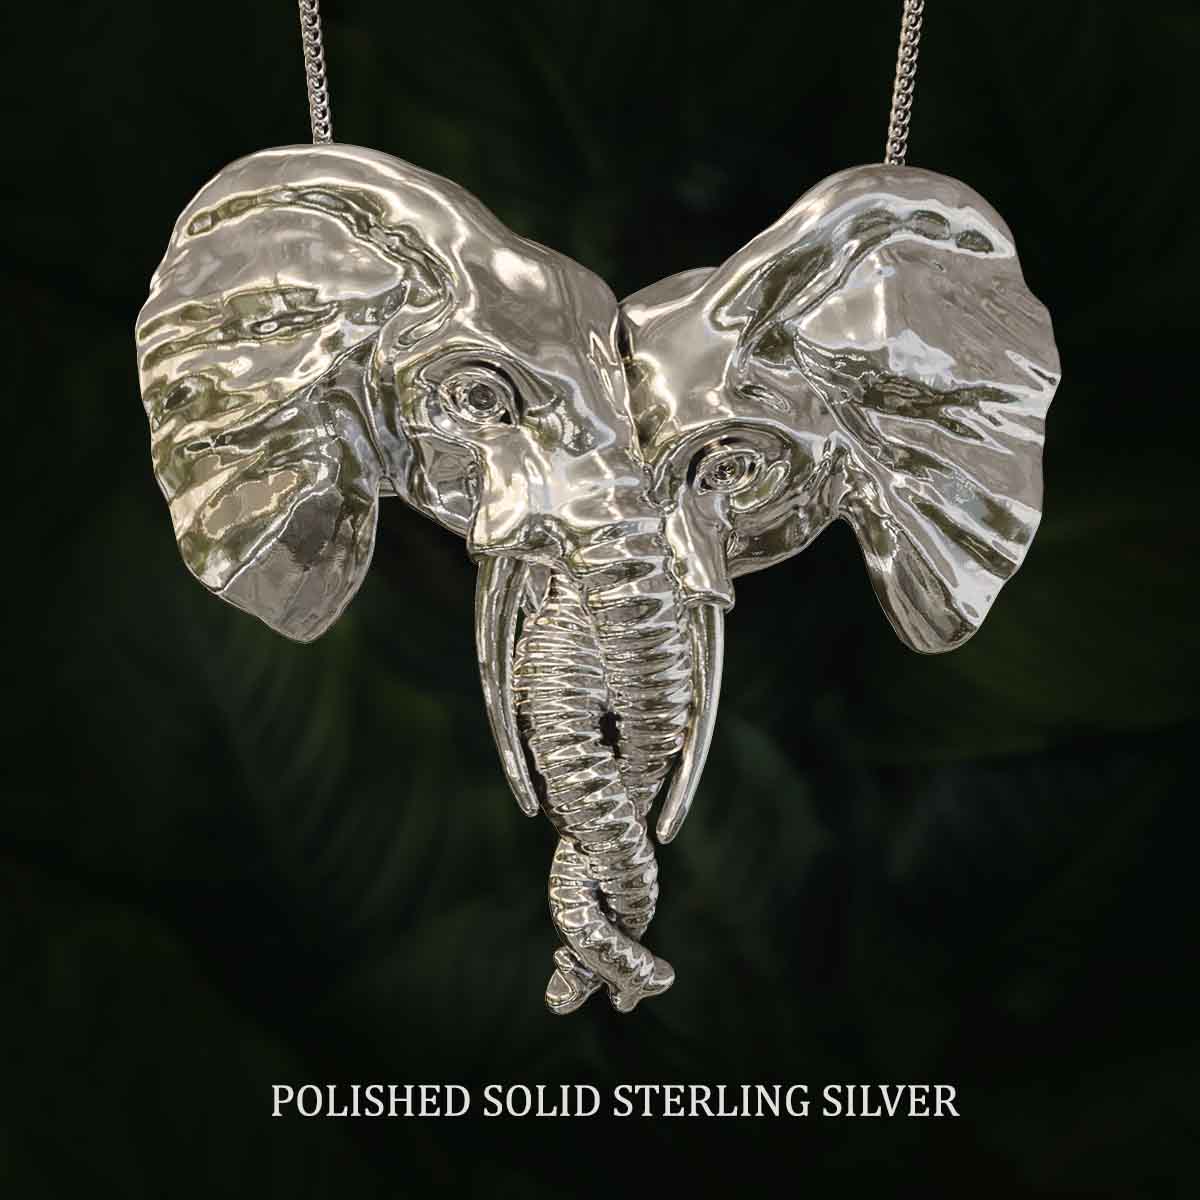 Polished-Solid-Sterling-Silver-Elephant-Heads-with-Trunks-Entwined-Pendant-Jewelry-For-Necklace